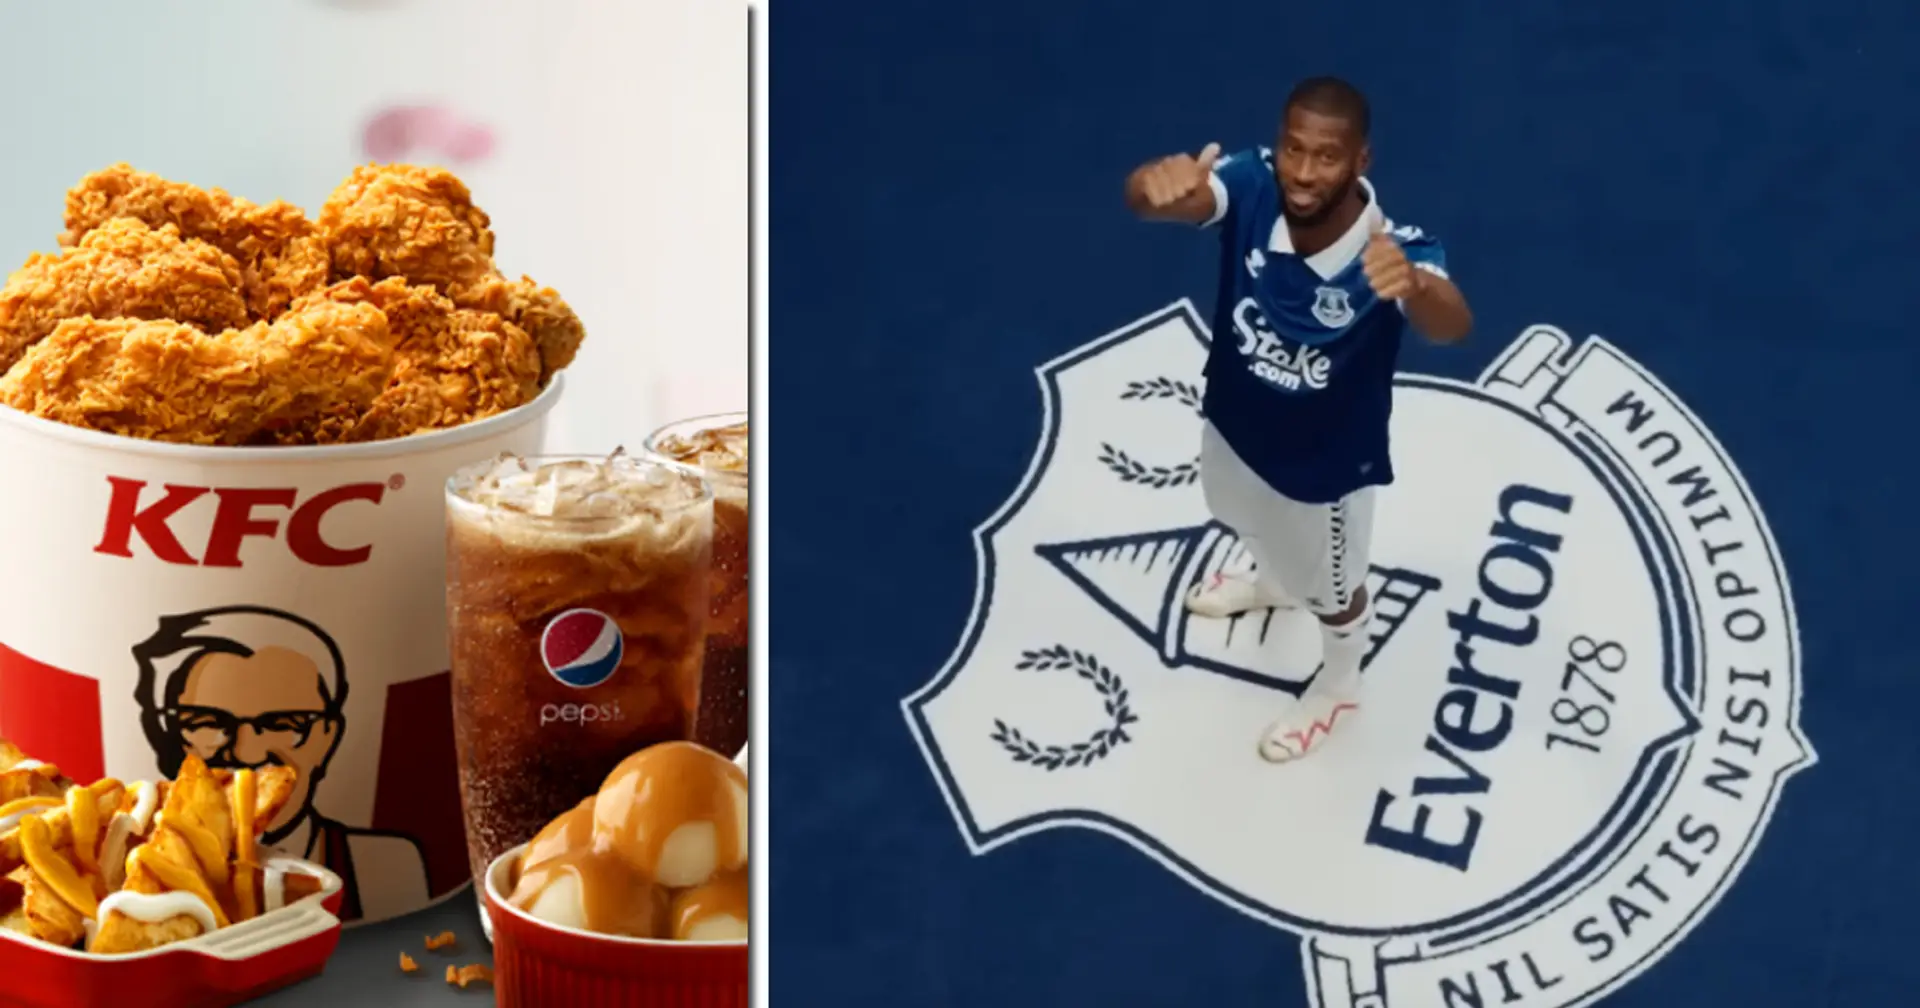 Everton sign €30m striker Beto — 5 years ago he worked part-time at KFC to help mum pay bills